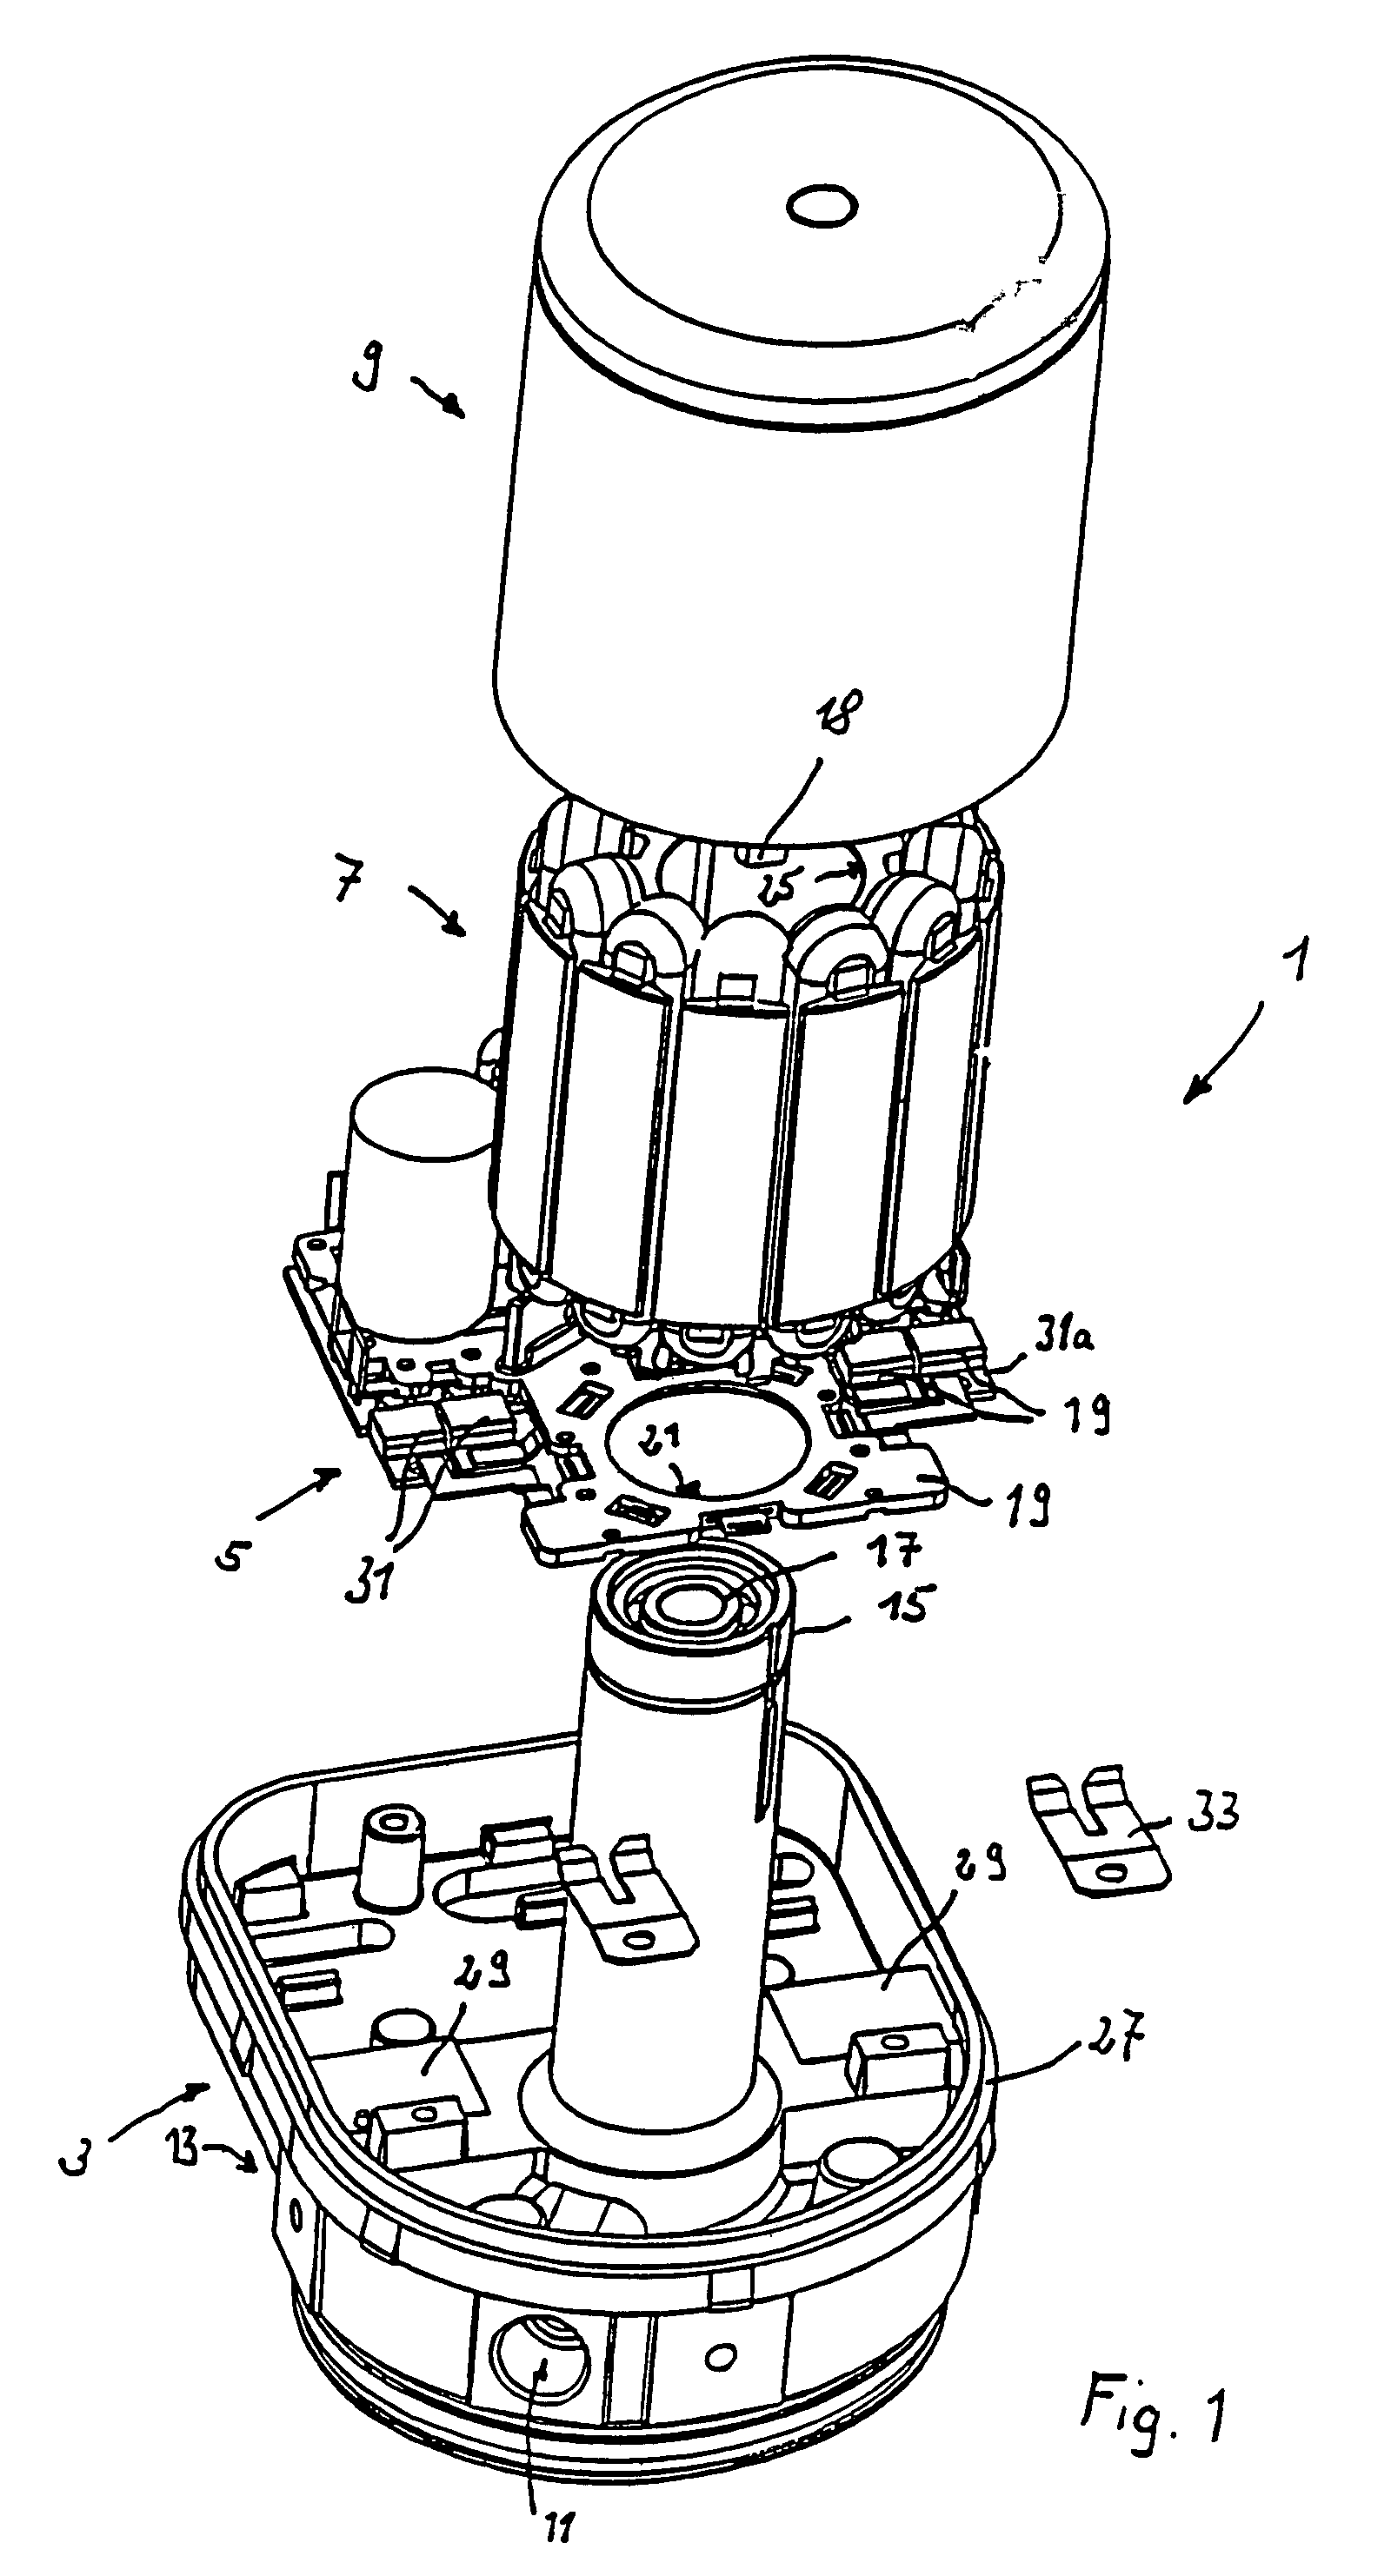 Electromotive drive system for use with a pump of a power-assisted steering system in a motor vehicle